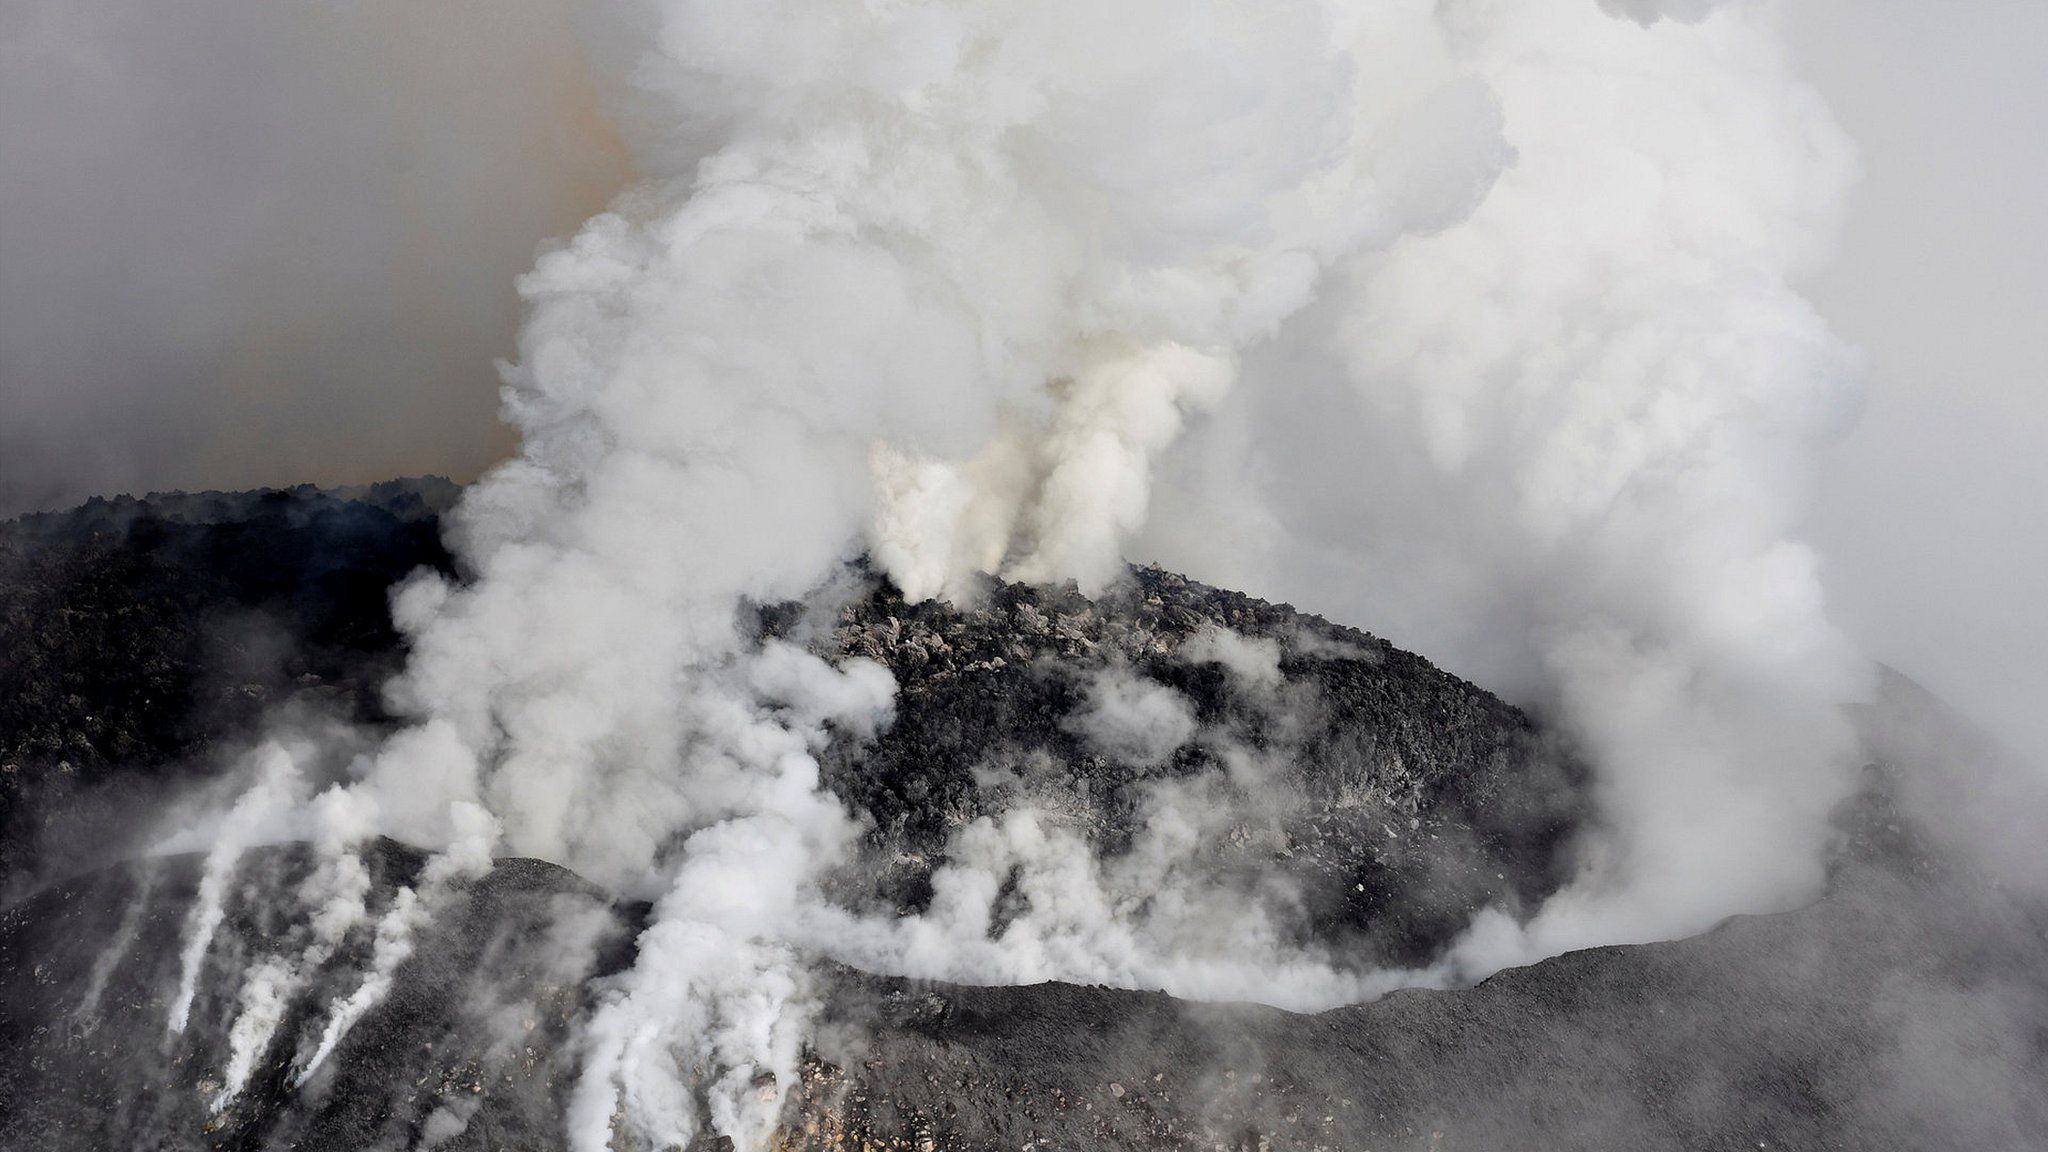 Aerial view of Colima volcano spewing smoke and ash on September 30, 2016